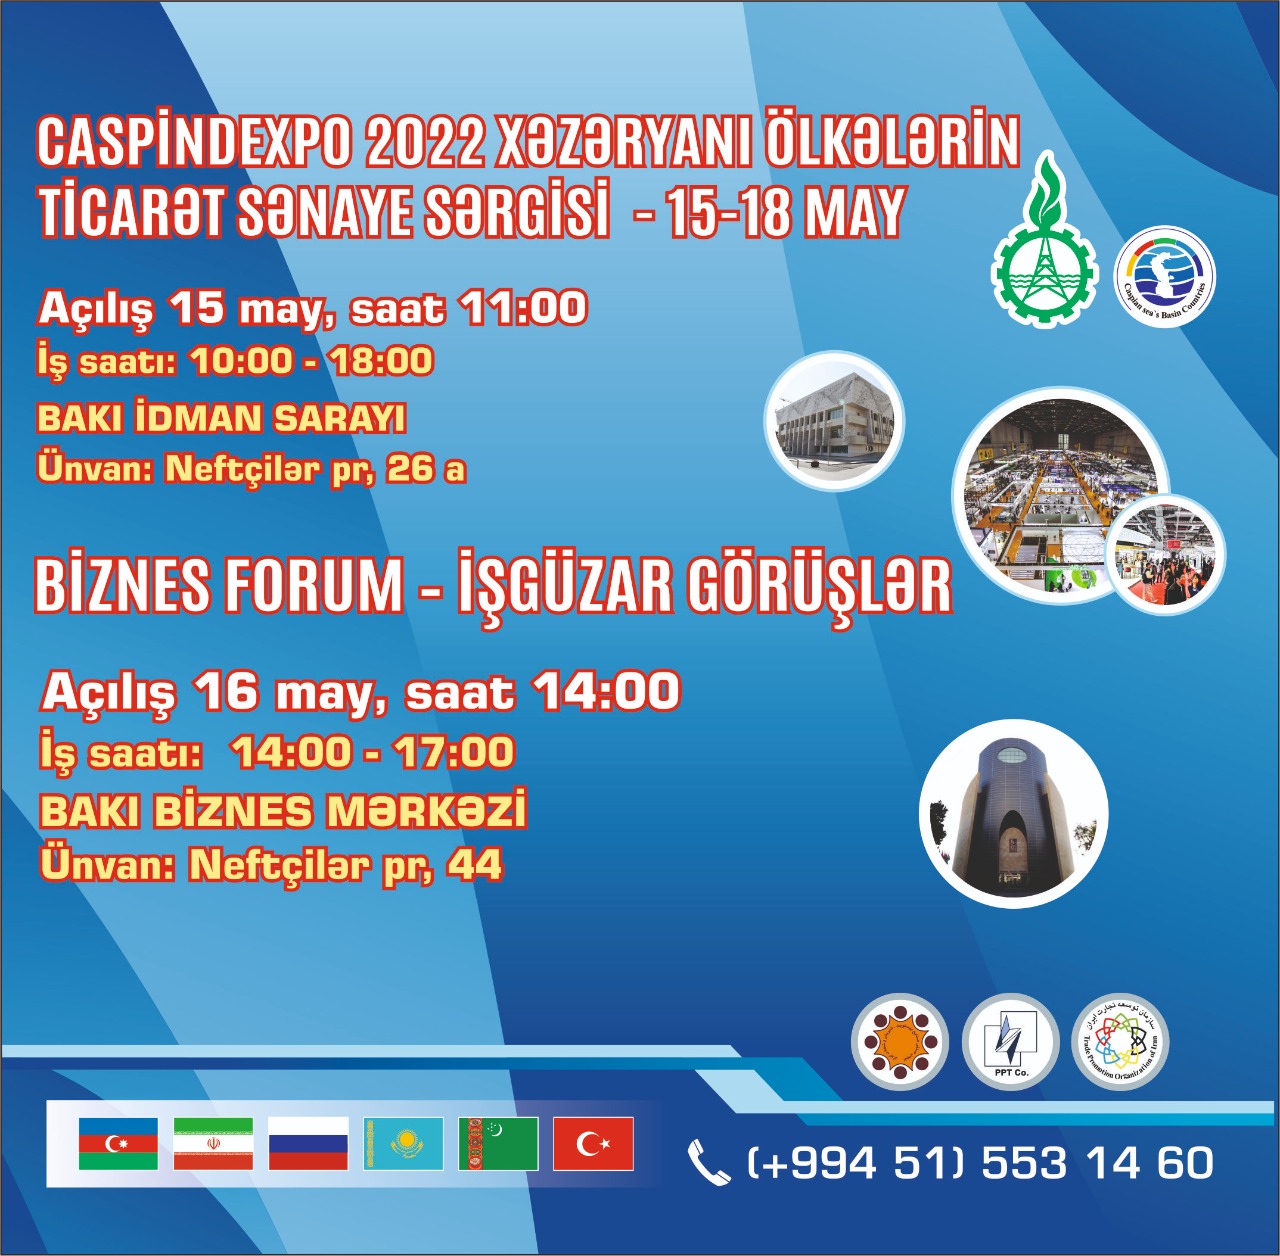 Azerbaijani entrepreneurs are invited to the CASPINDEXPO 2022 exhibition and business forum